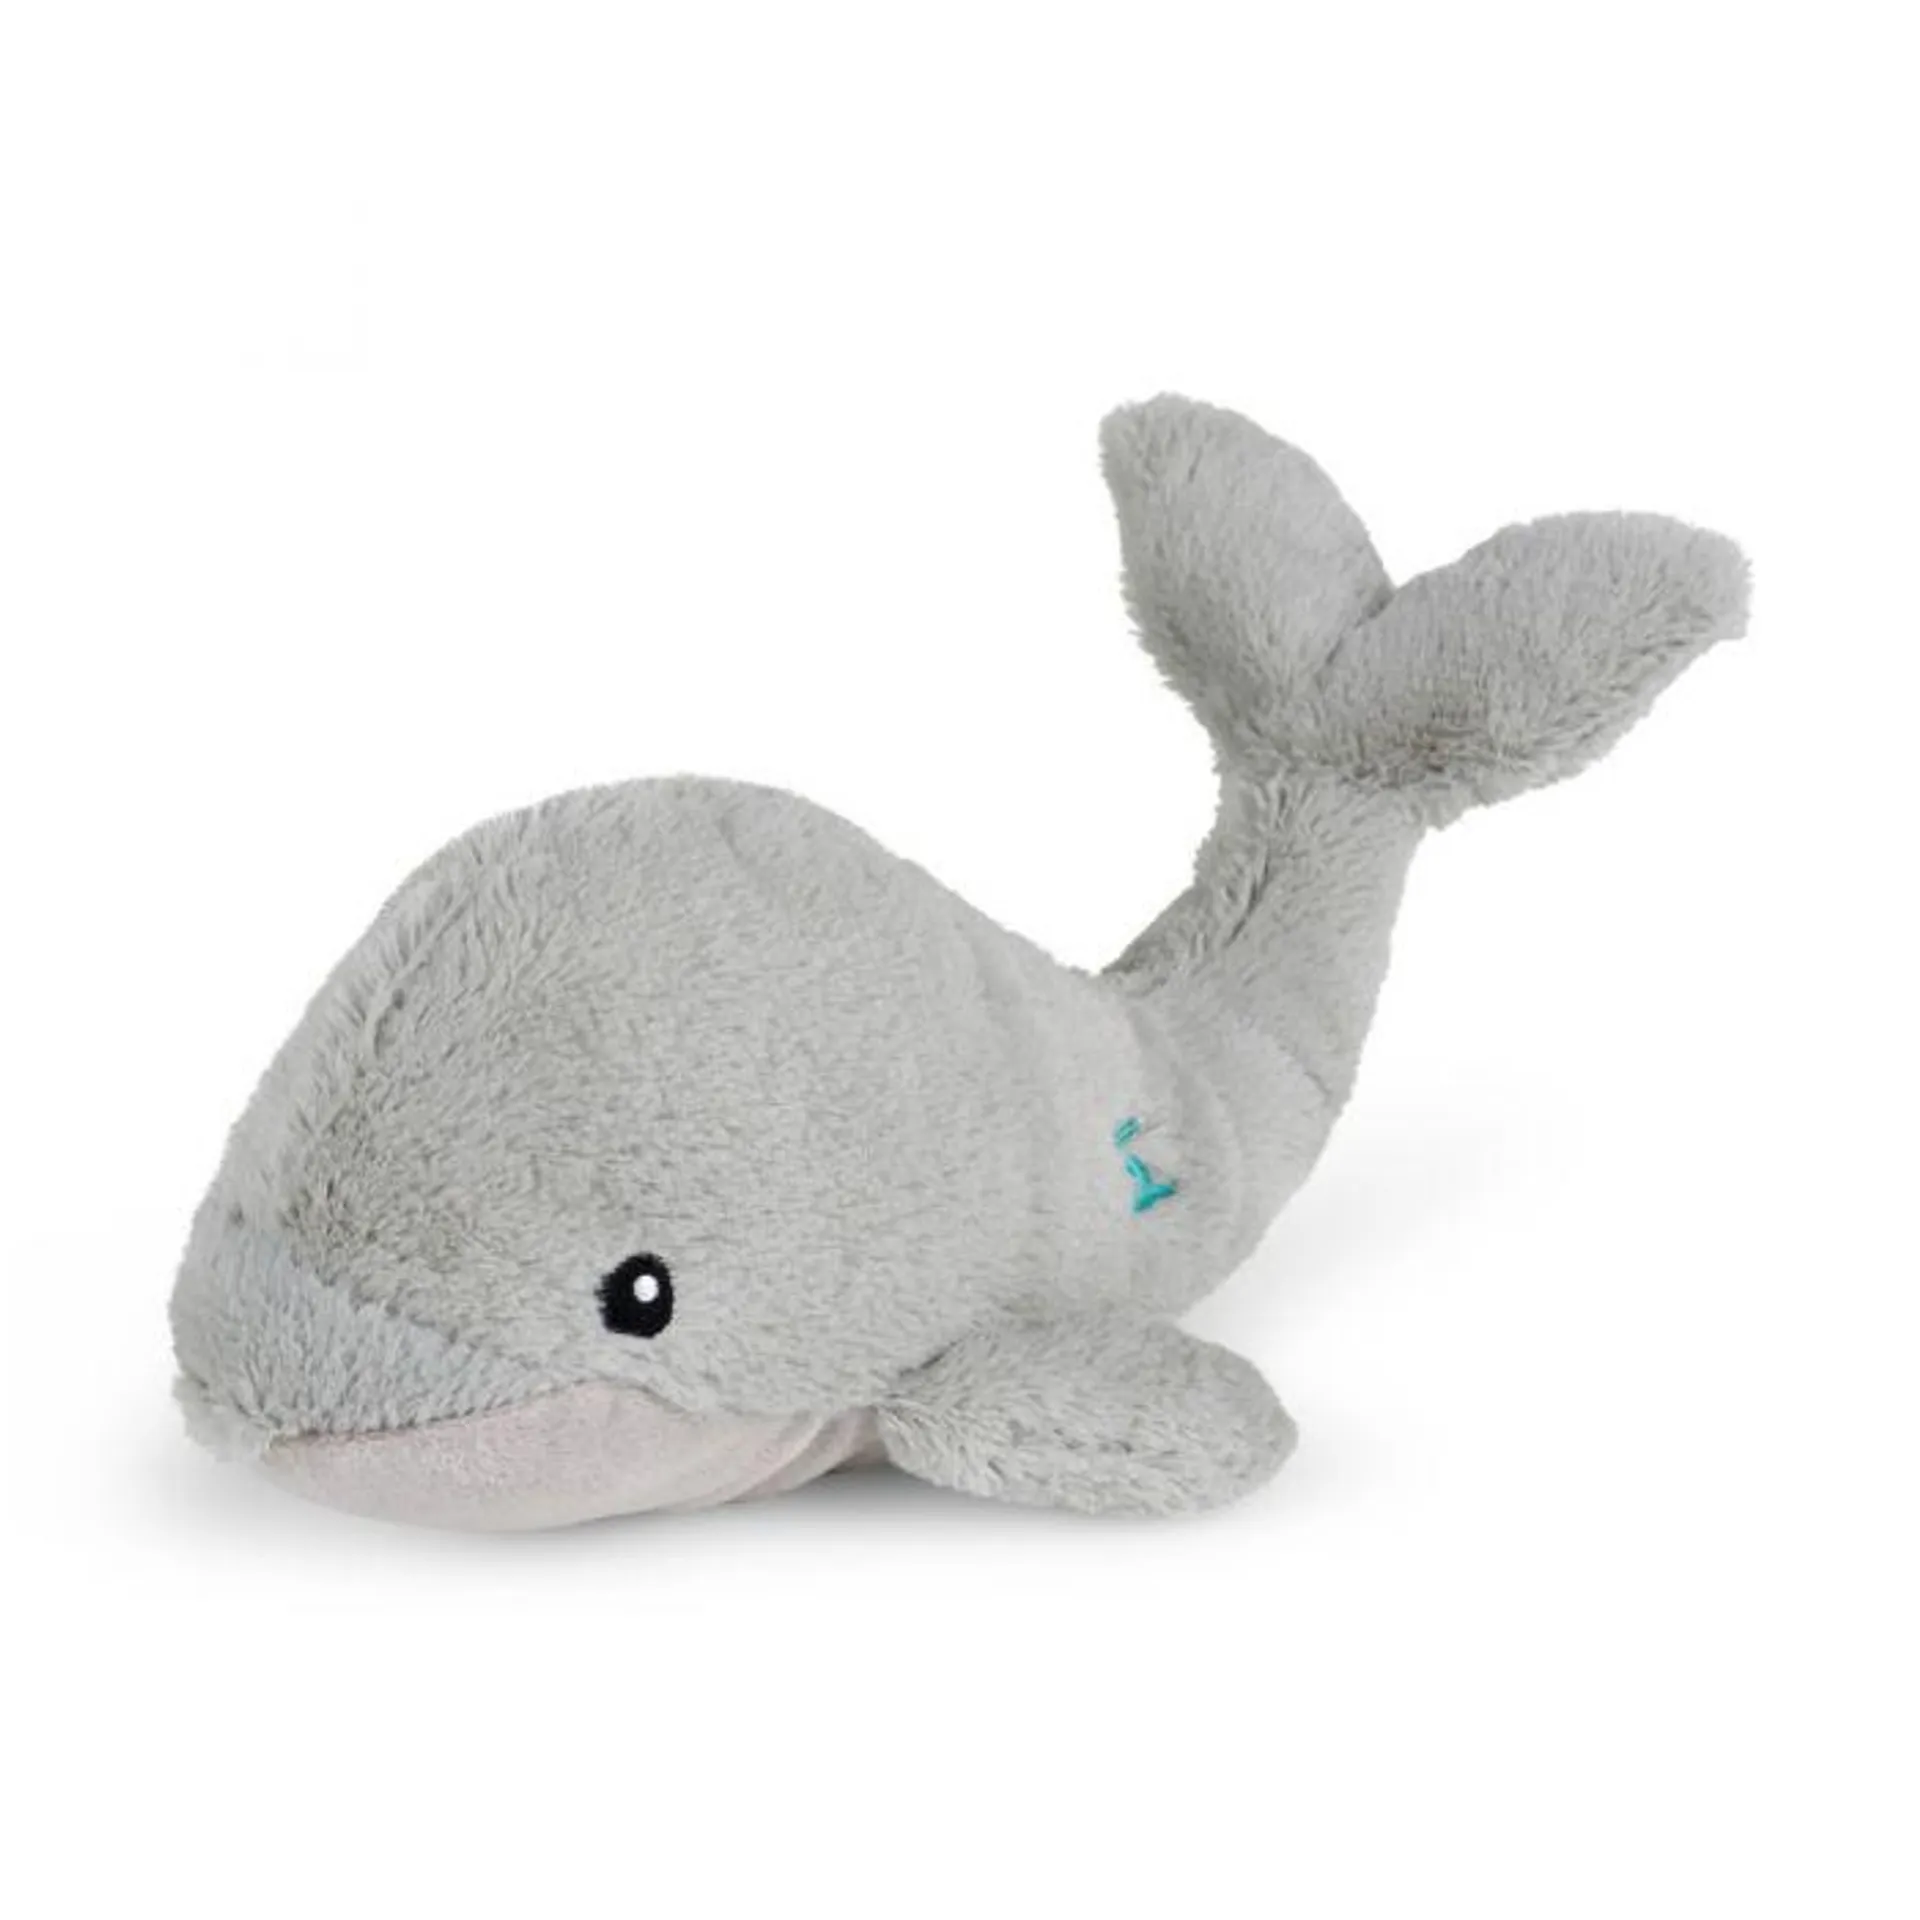 Petface Planet - Wolly Whale Dog Toy